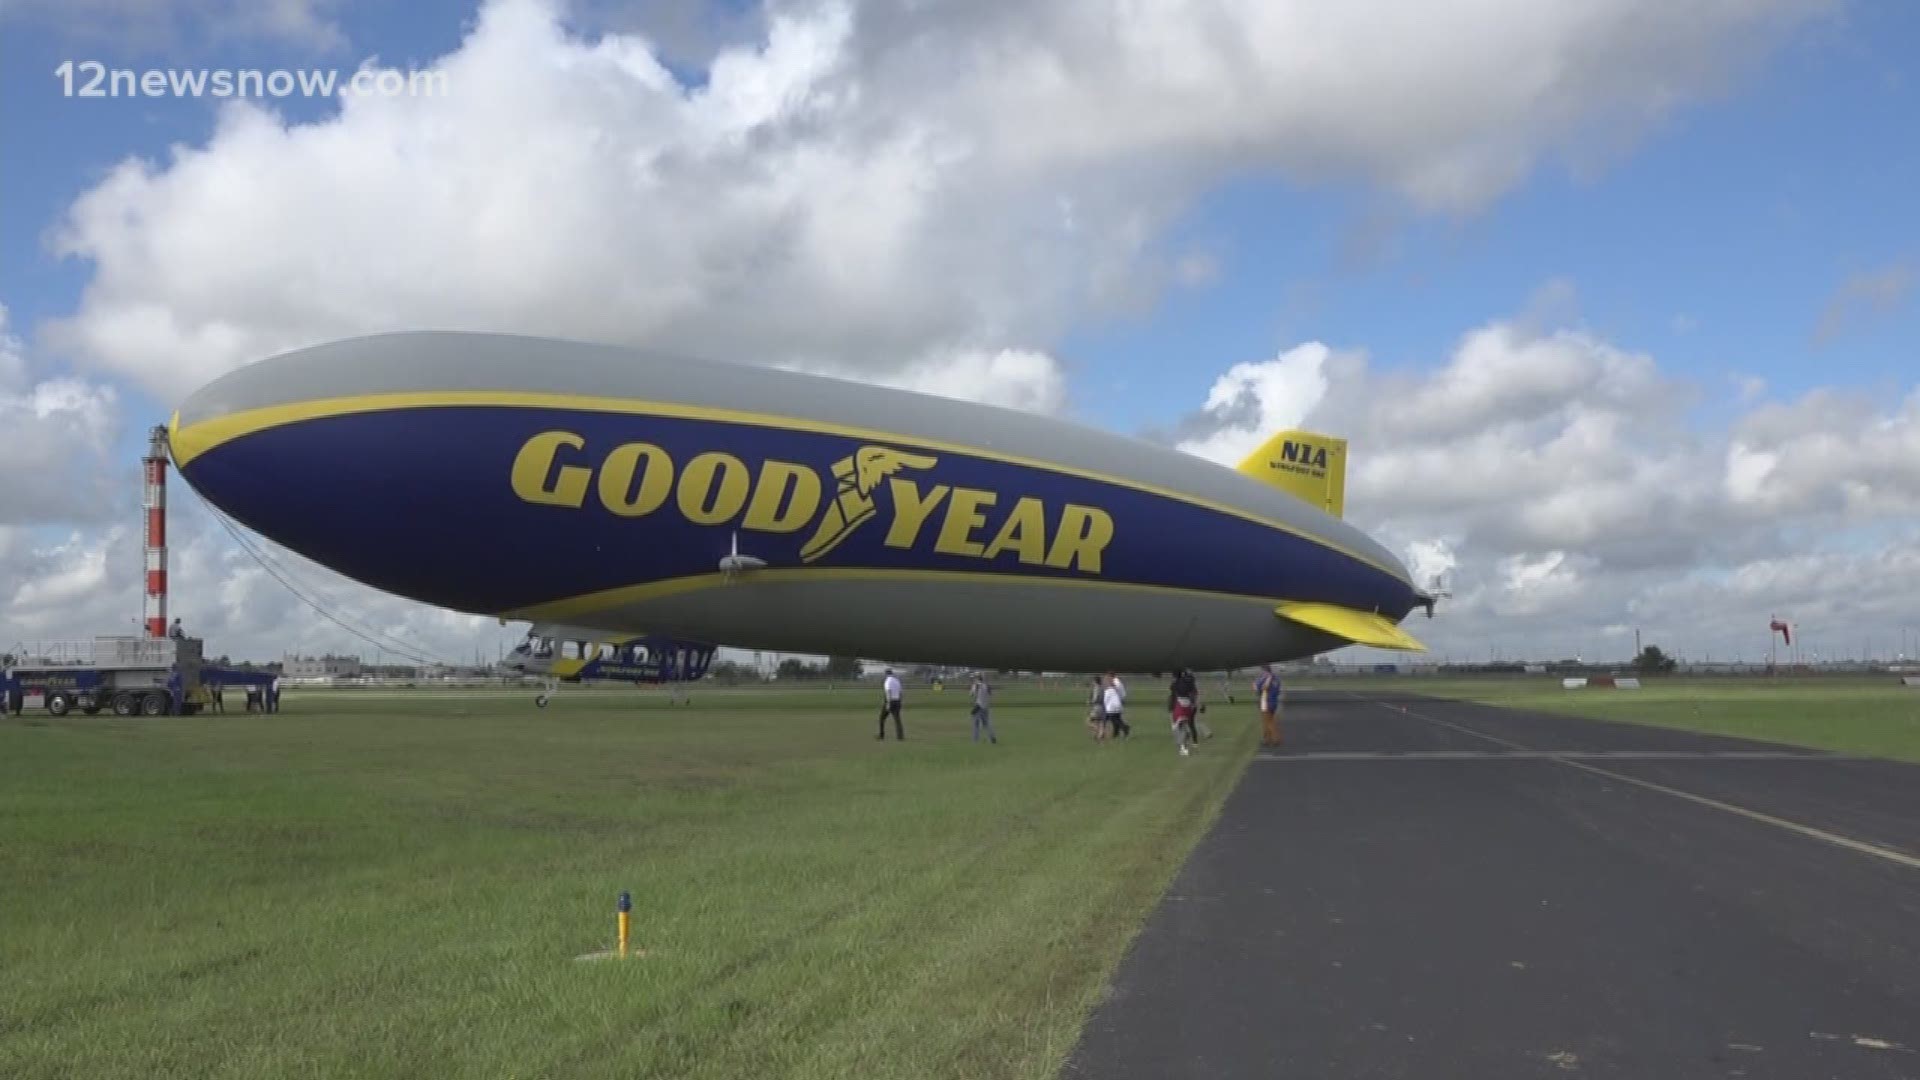 Goodyear employees get chance to float over Beaumont in the Goodyear Blimp